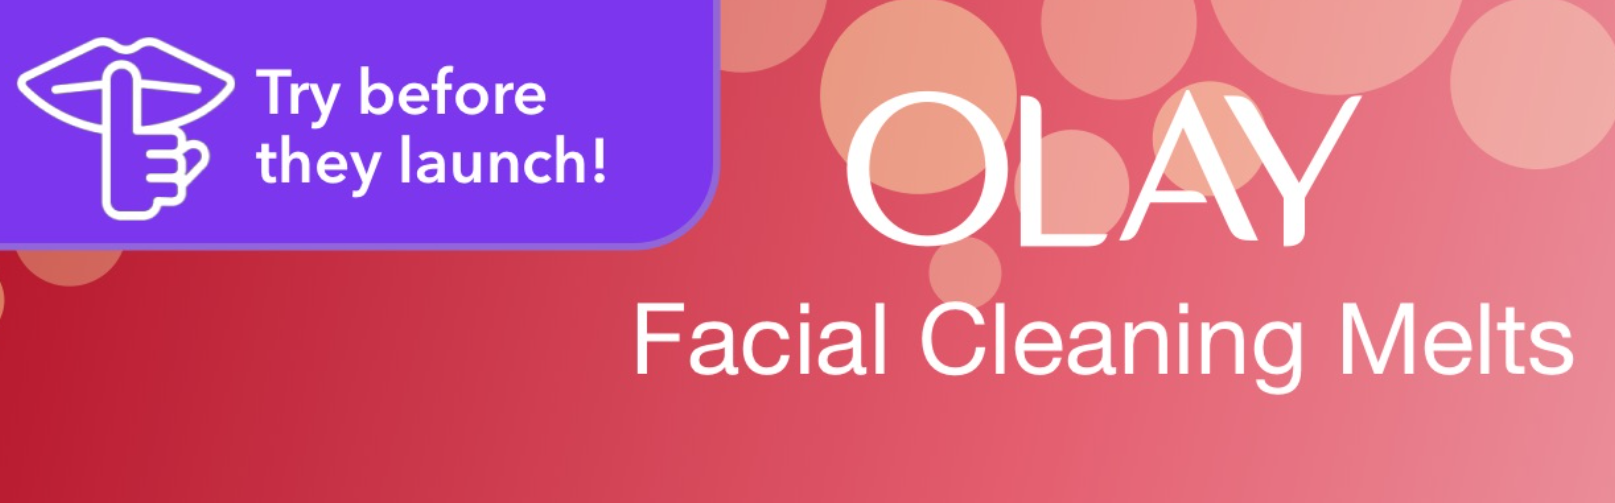 FREE Full-Size Olay Facial Cleansing Melts